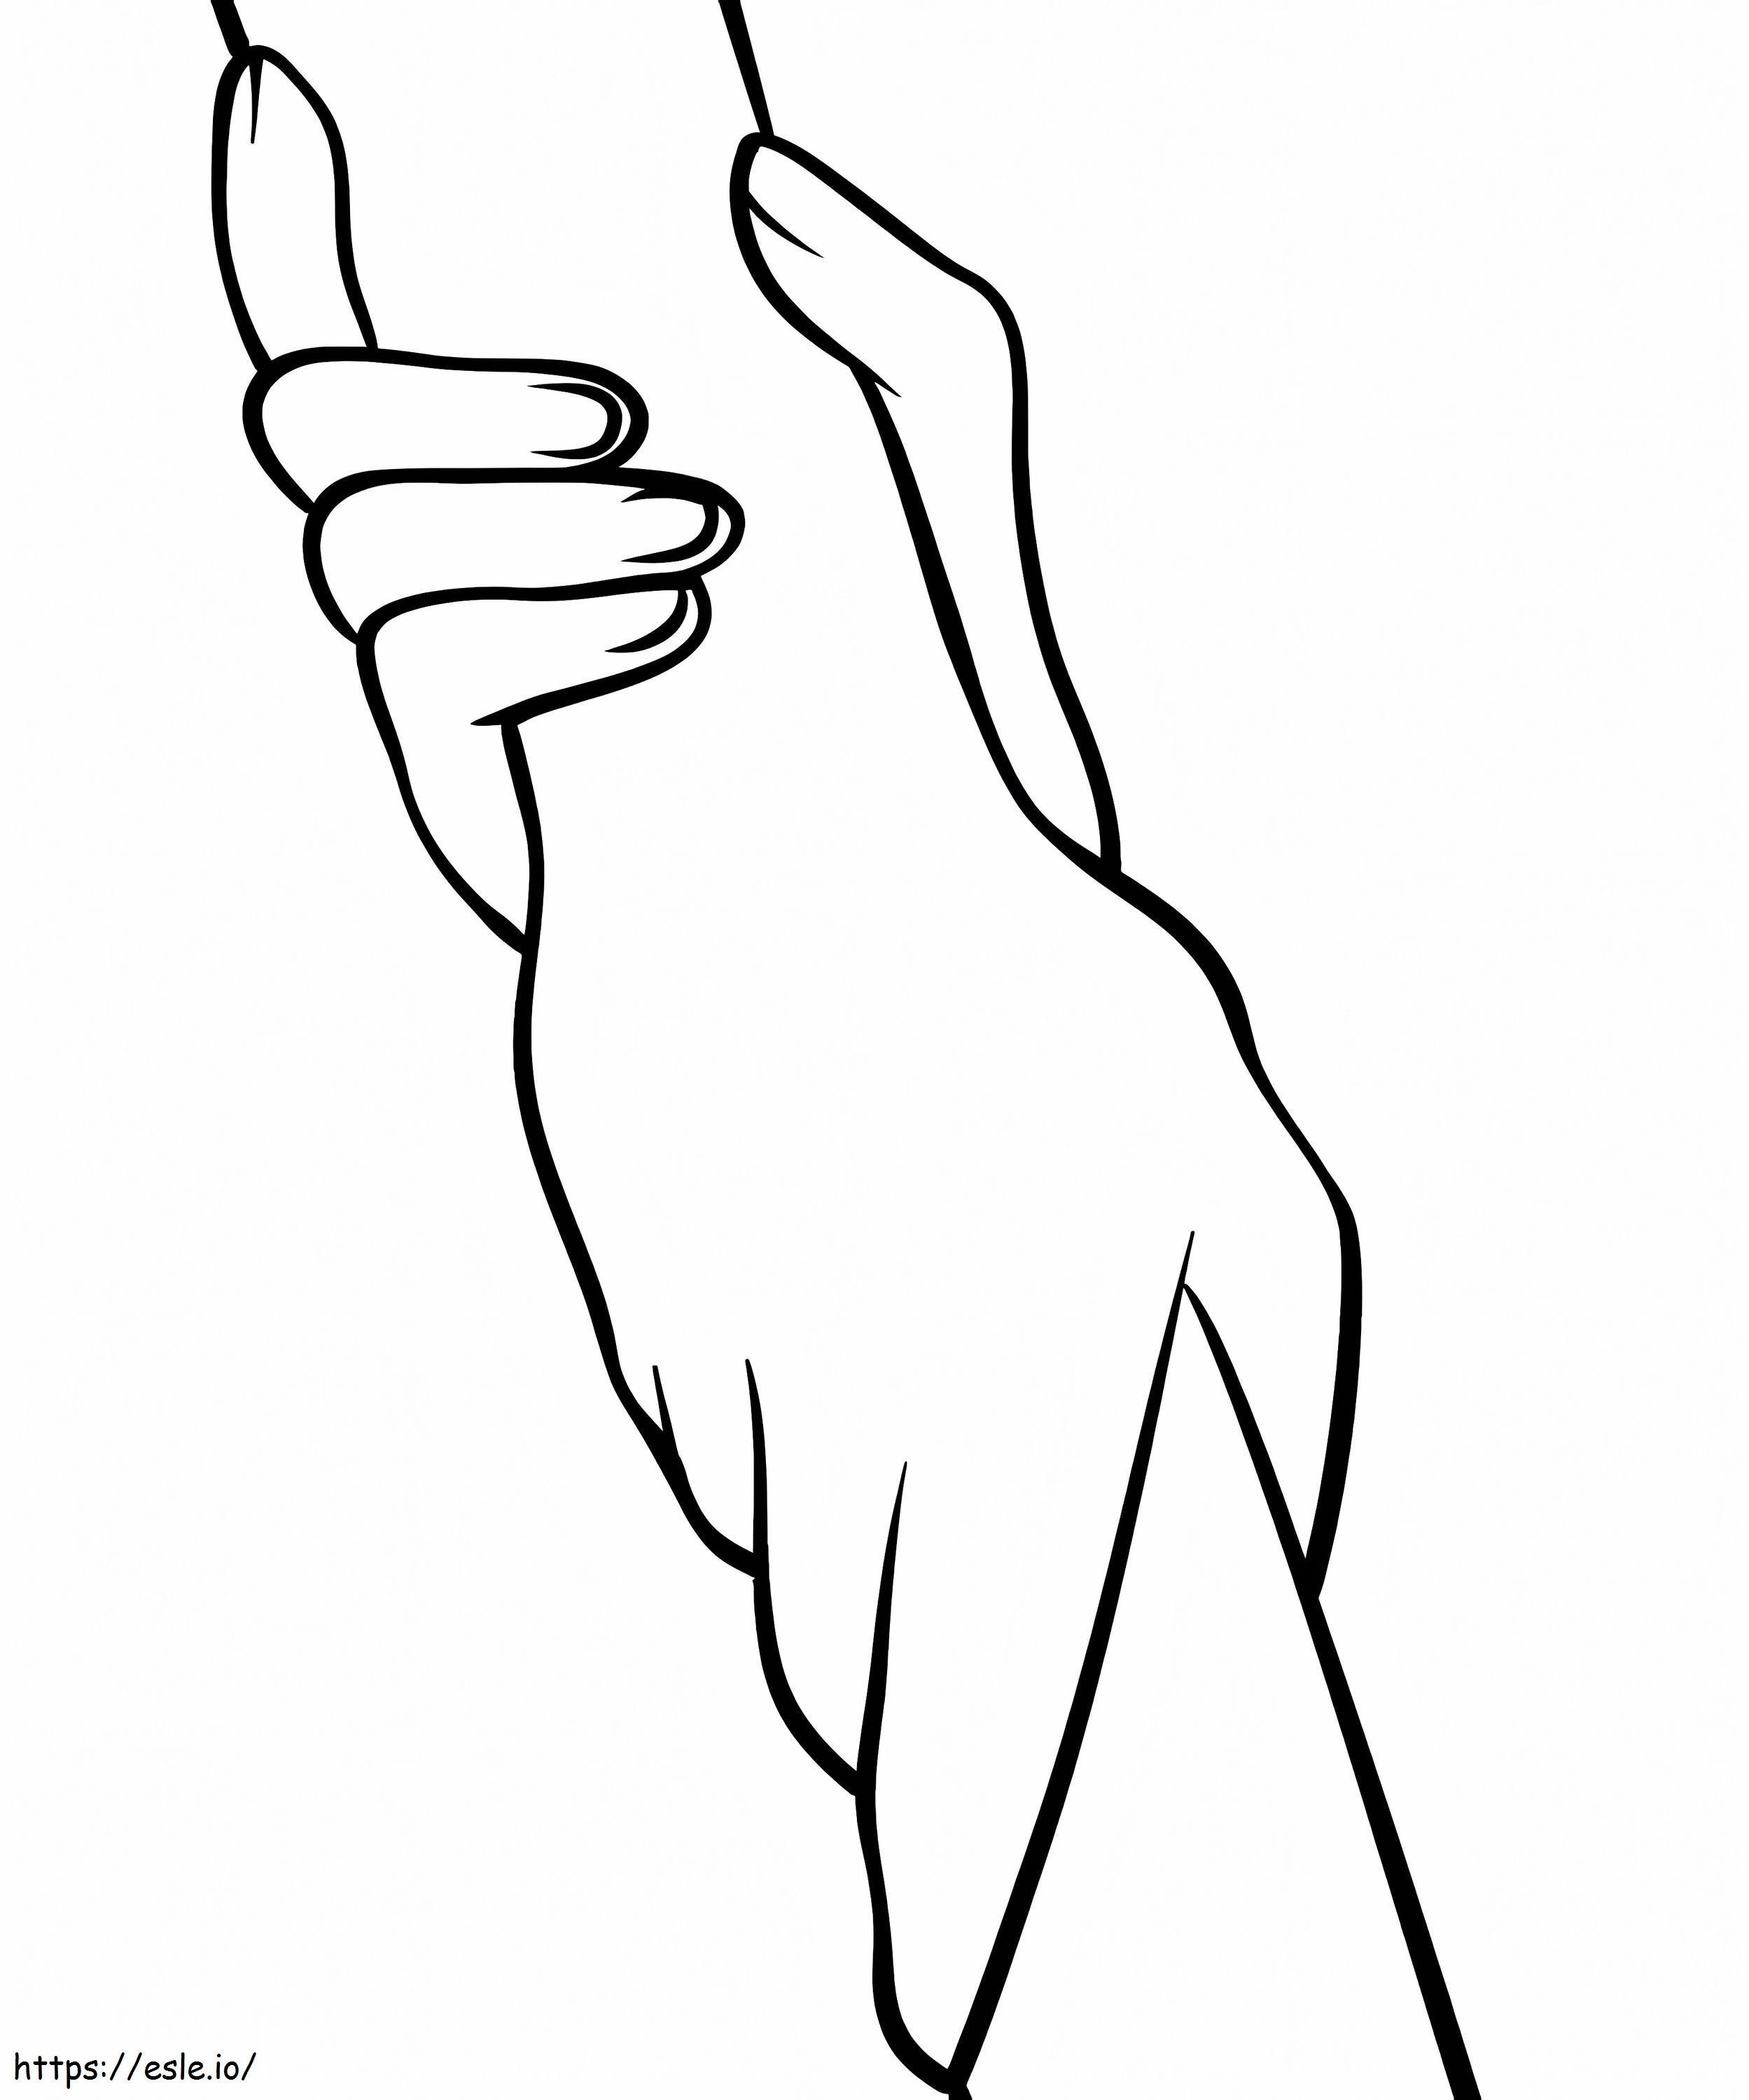 Helping Hands coloring page